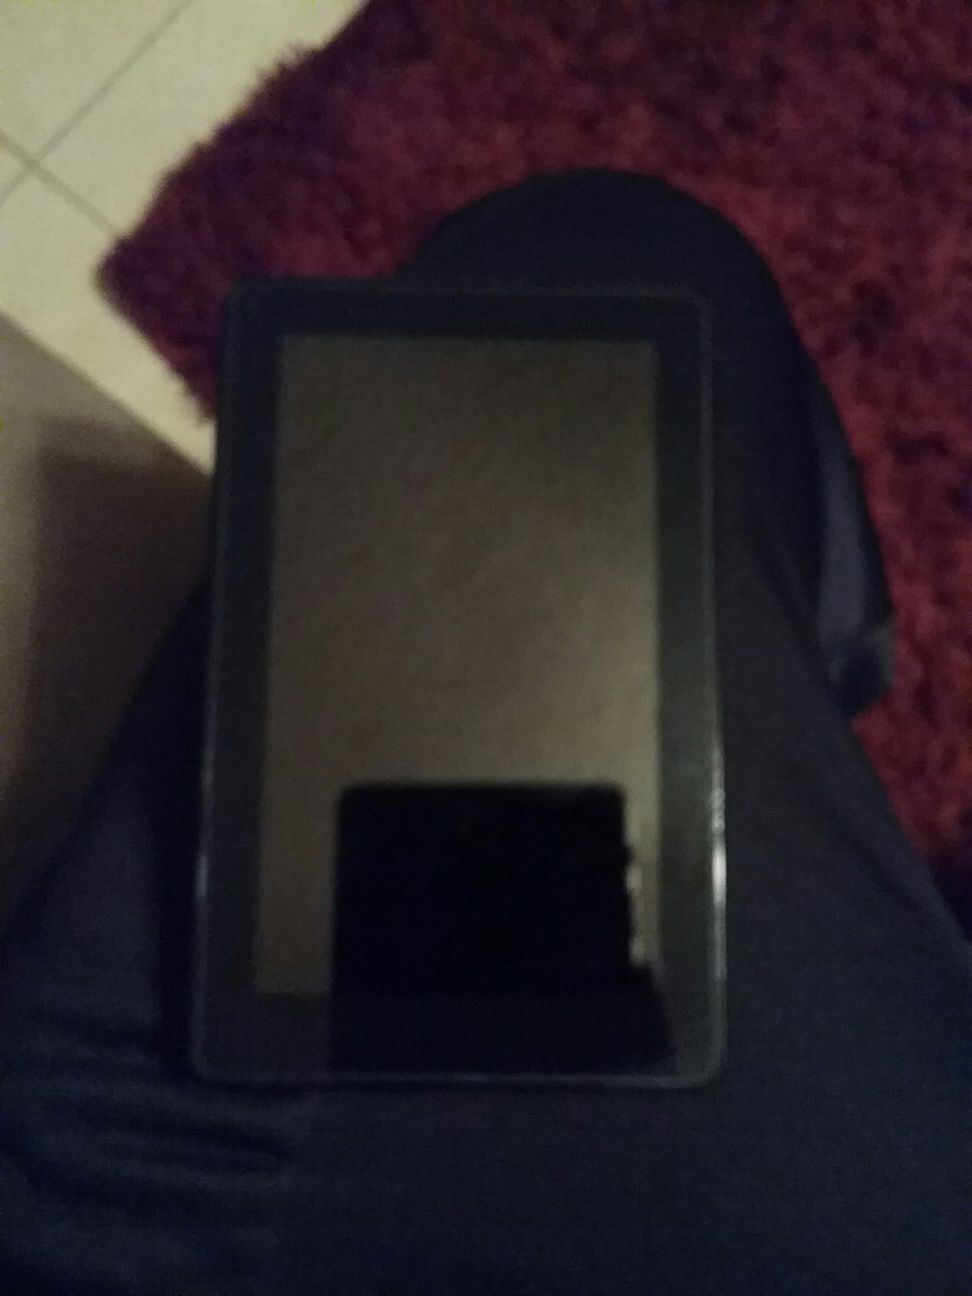 Kindle Fire tablet works great